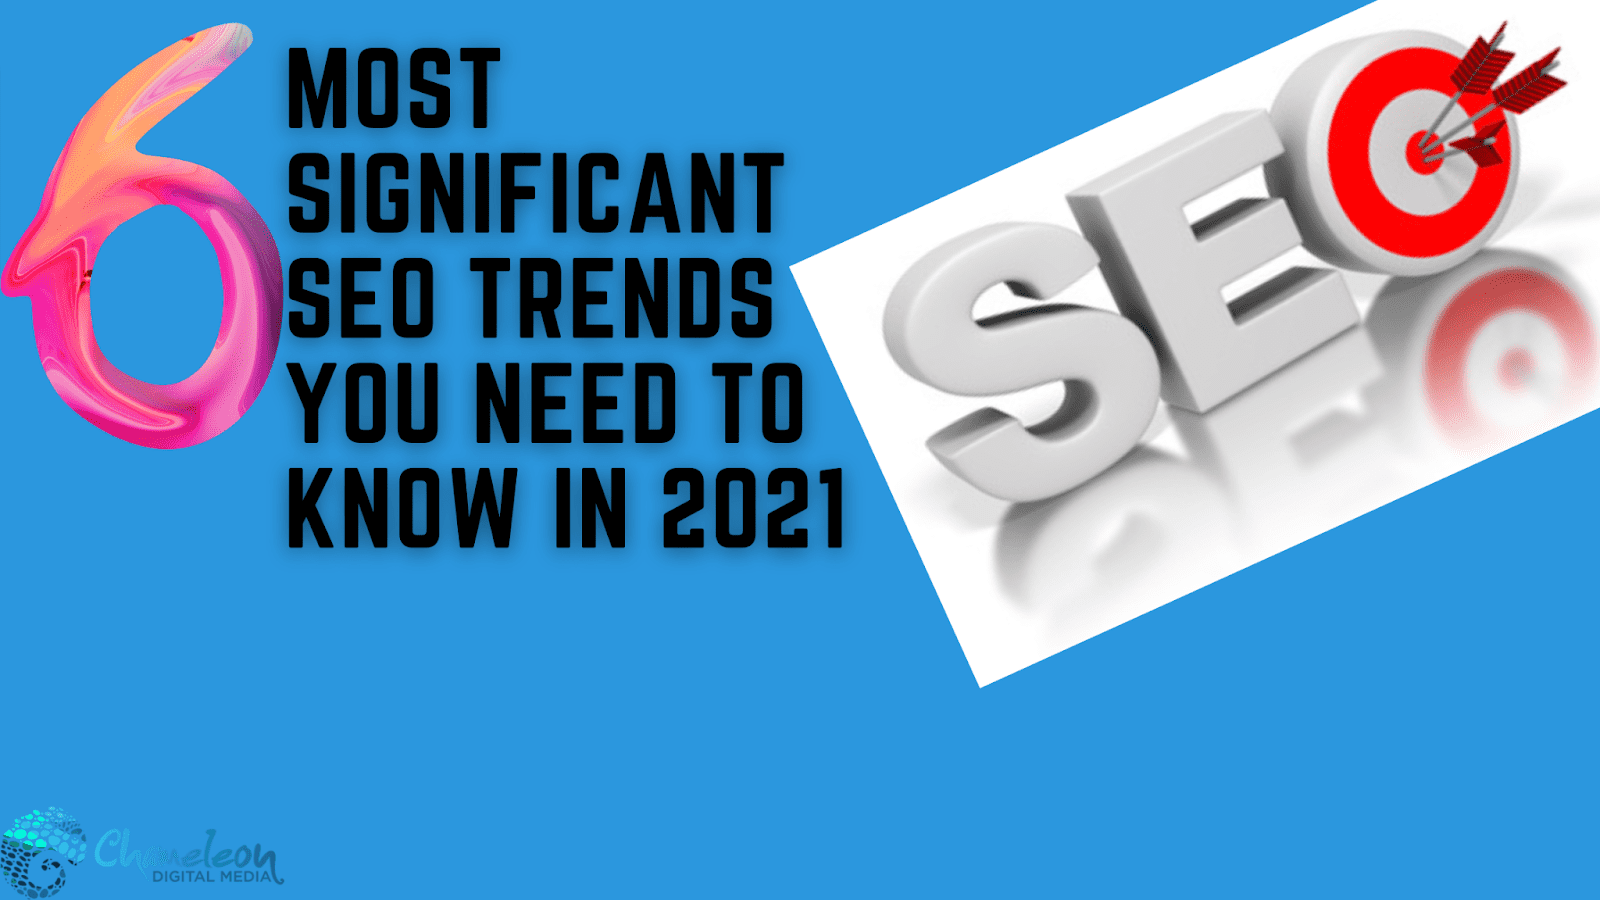 6 Most Significant SEO Trends You Need to Know In 2021